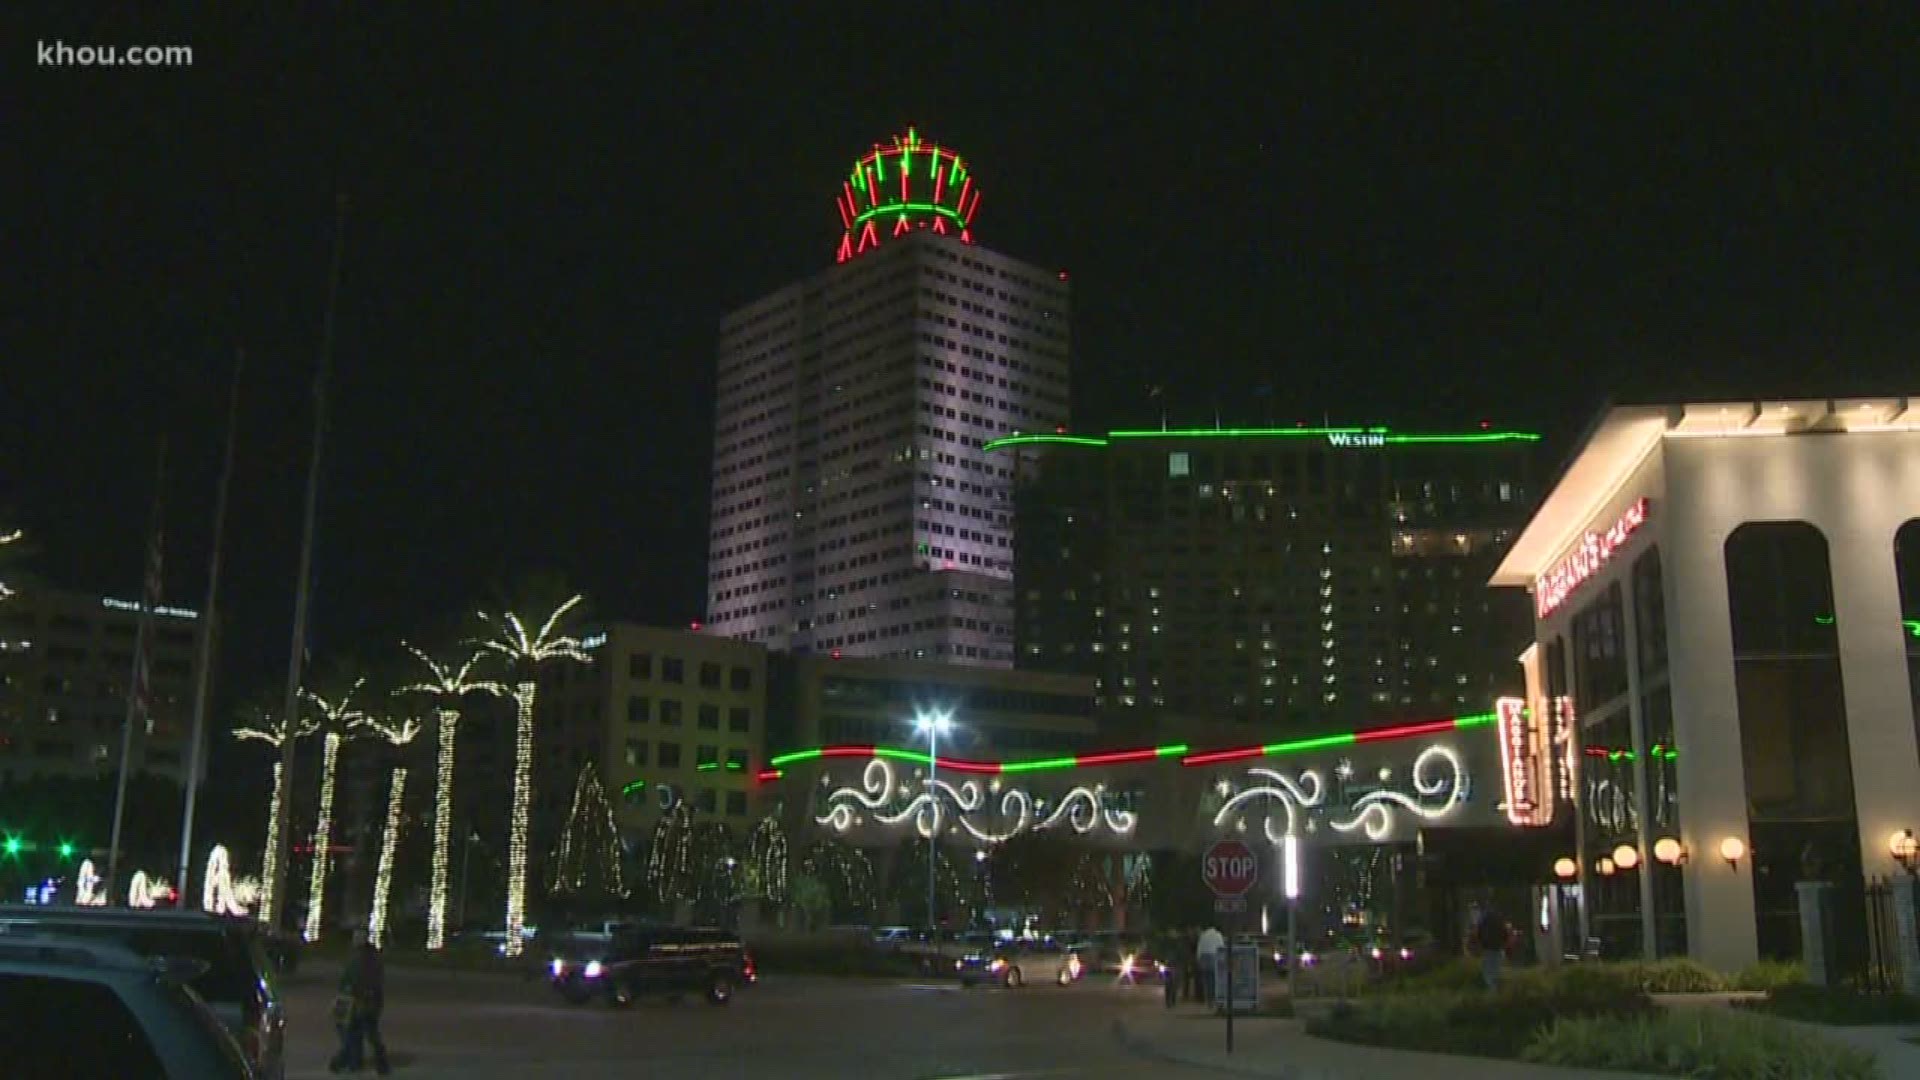 The 8th annual Memorial City Lights extravaganza Saturday kicked off the holiday season!